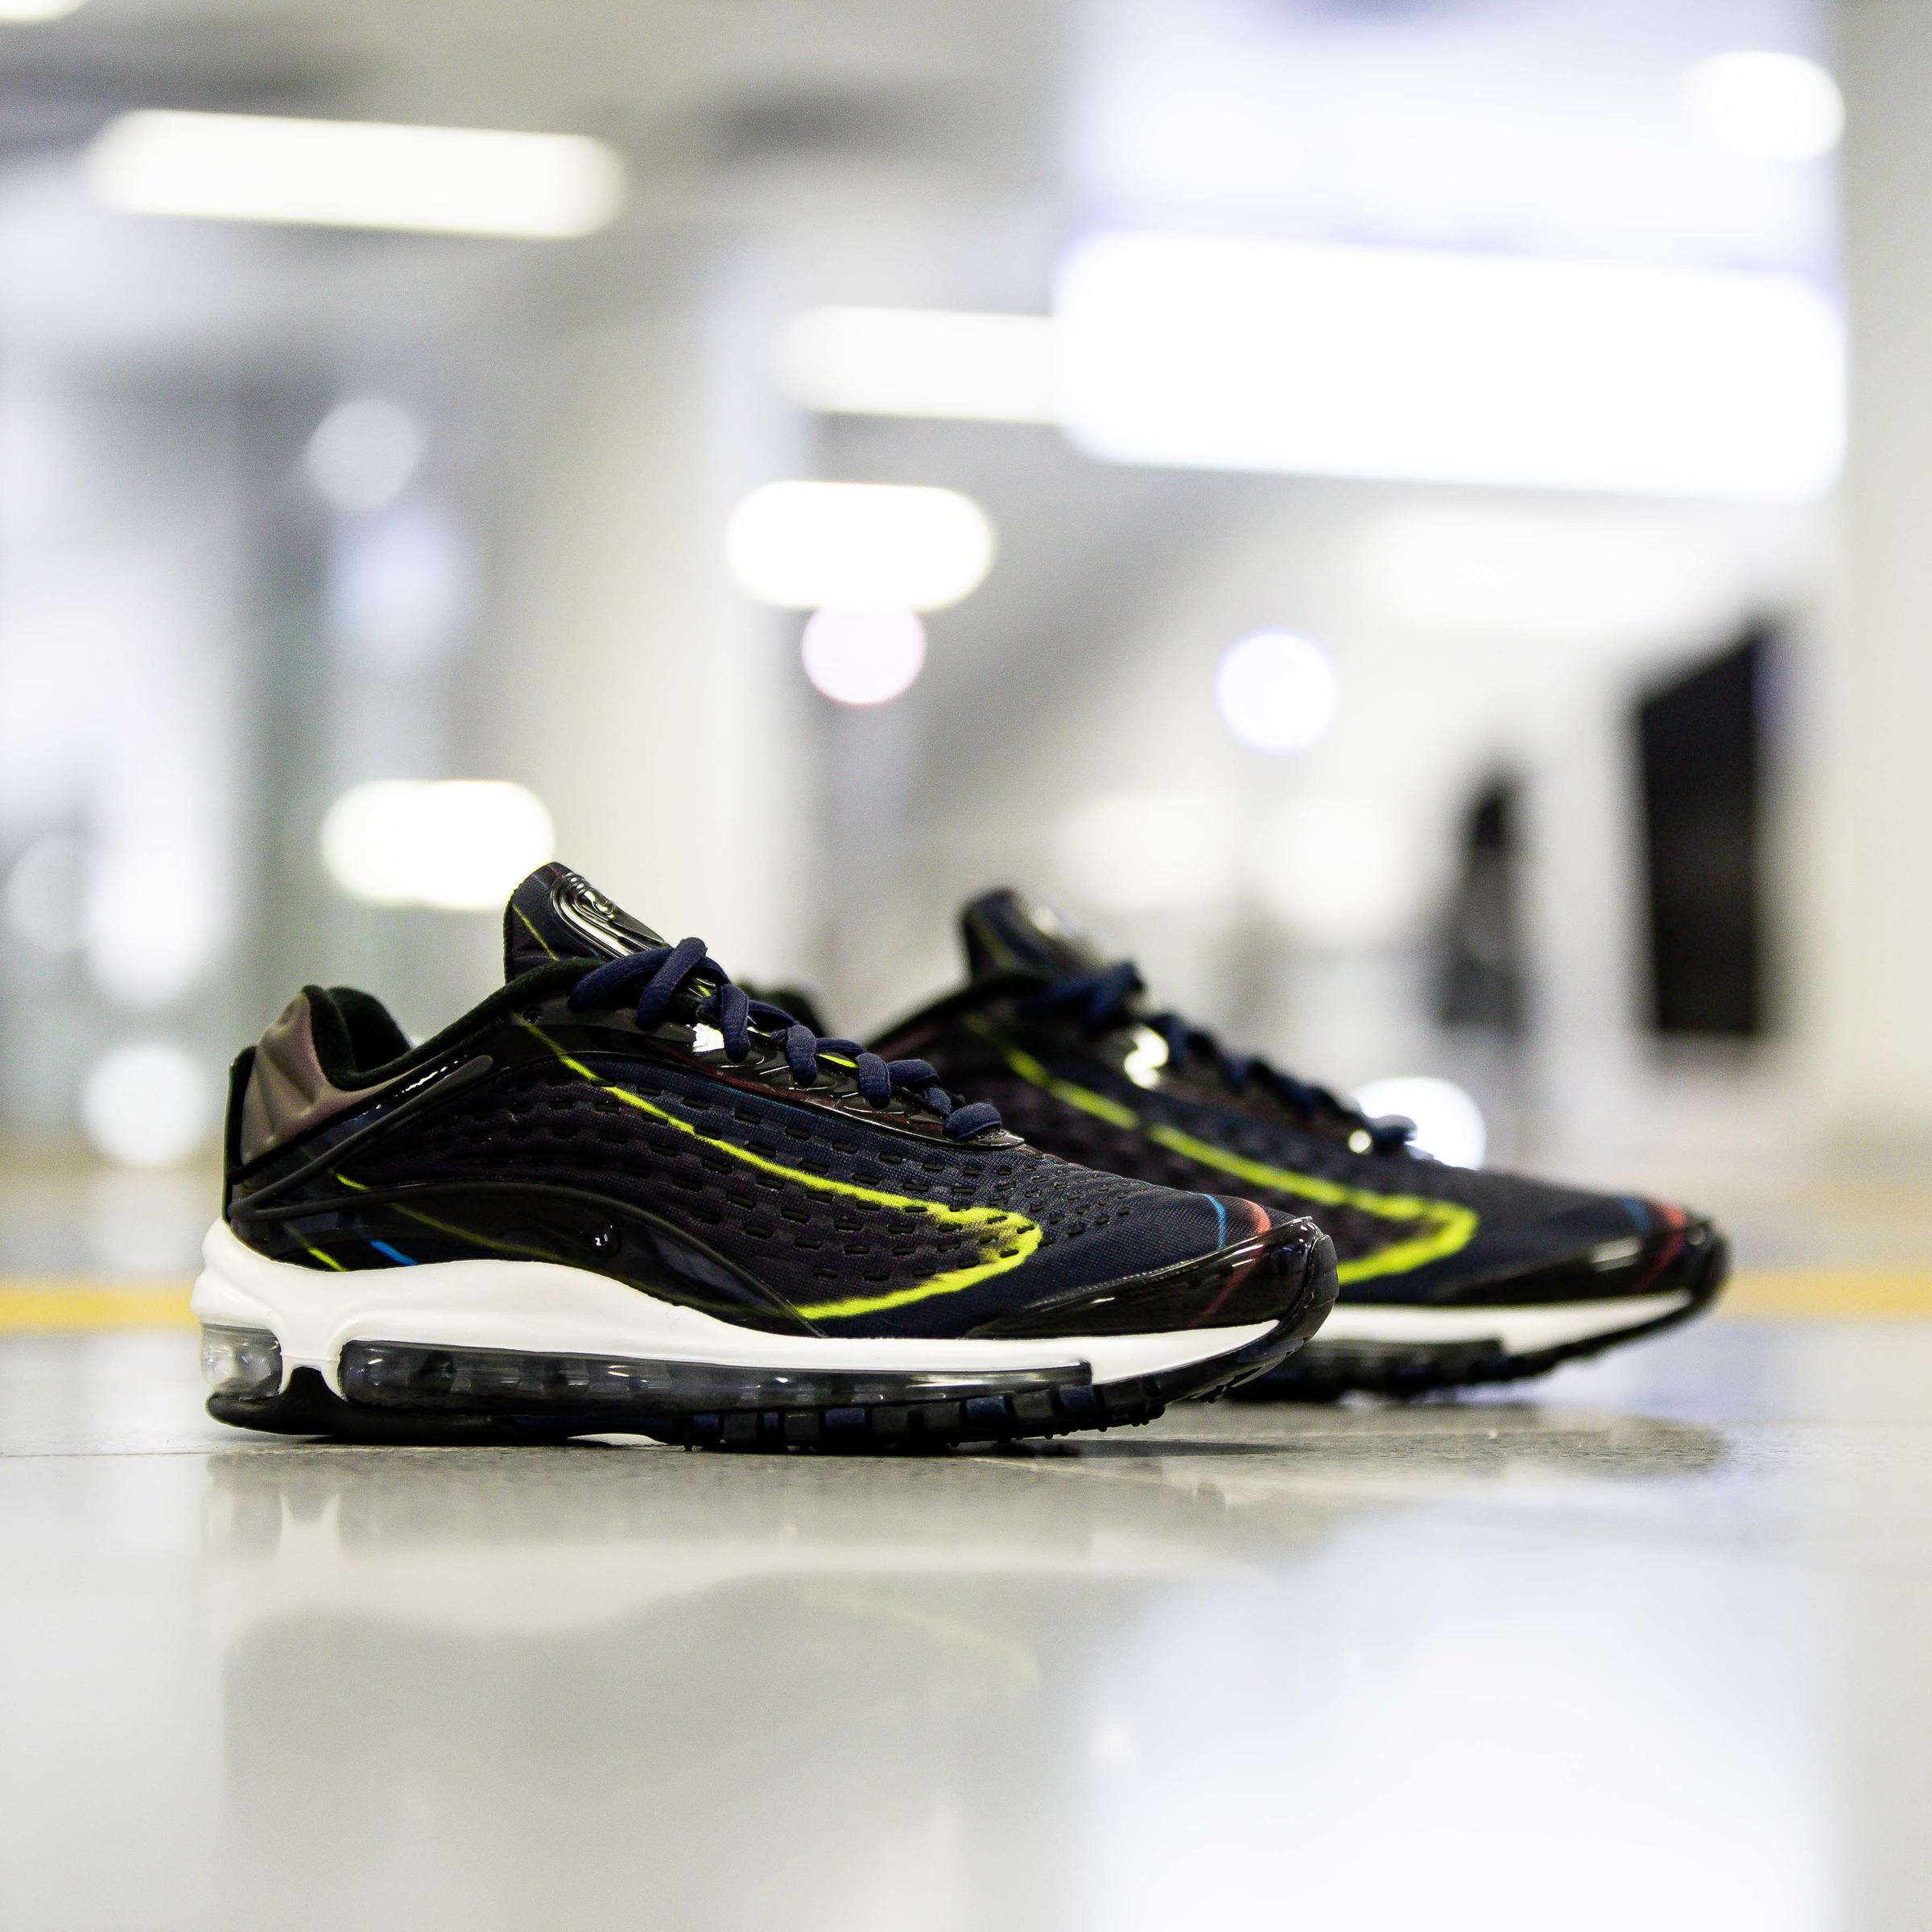 Nike WMNS Air Max Deluxe "Black Navy"